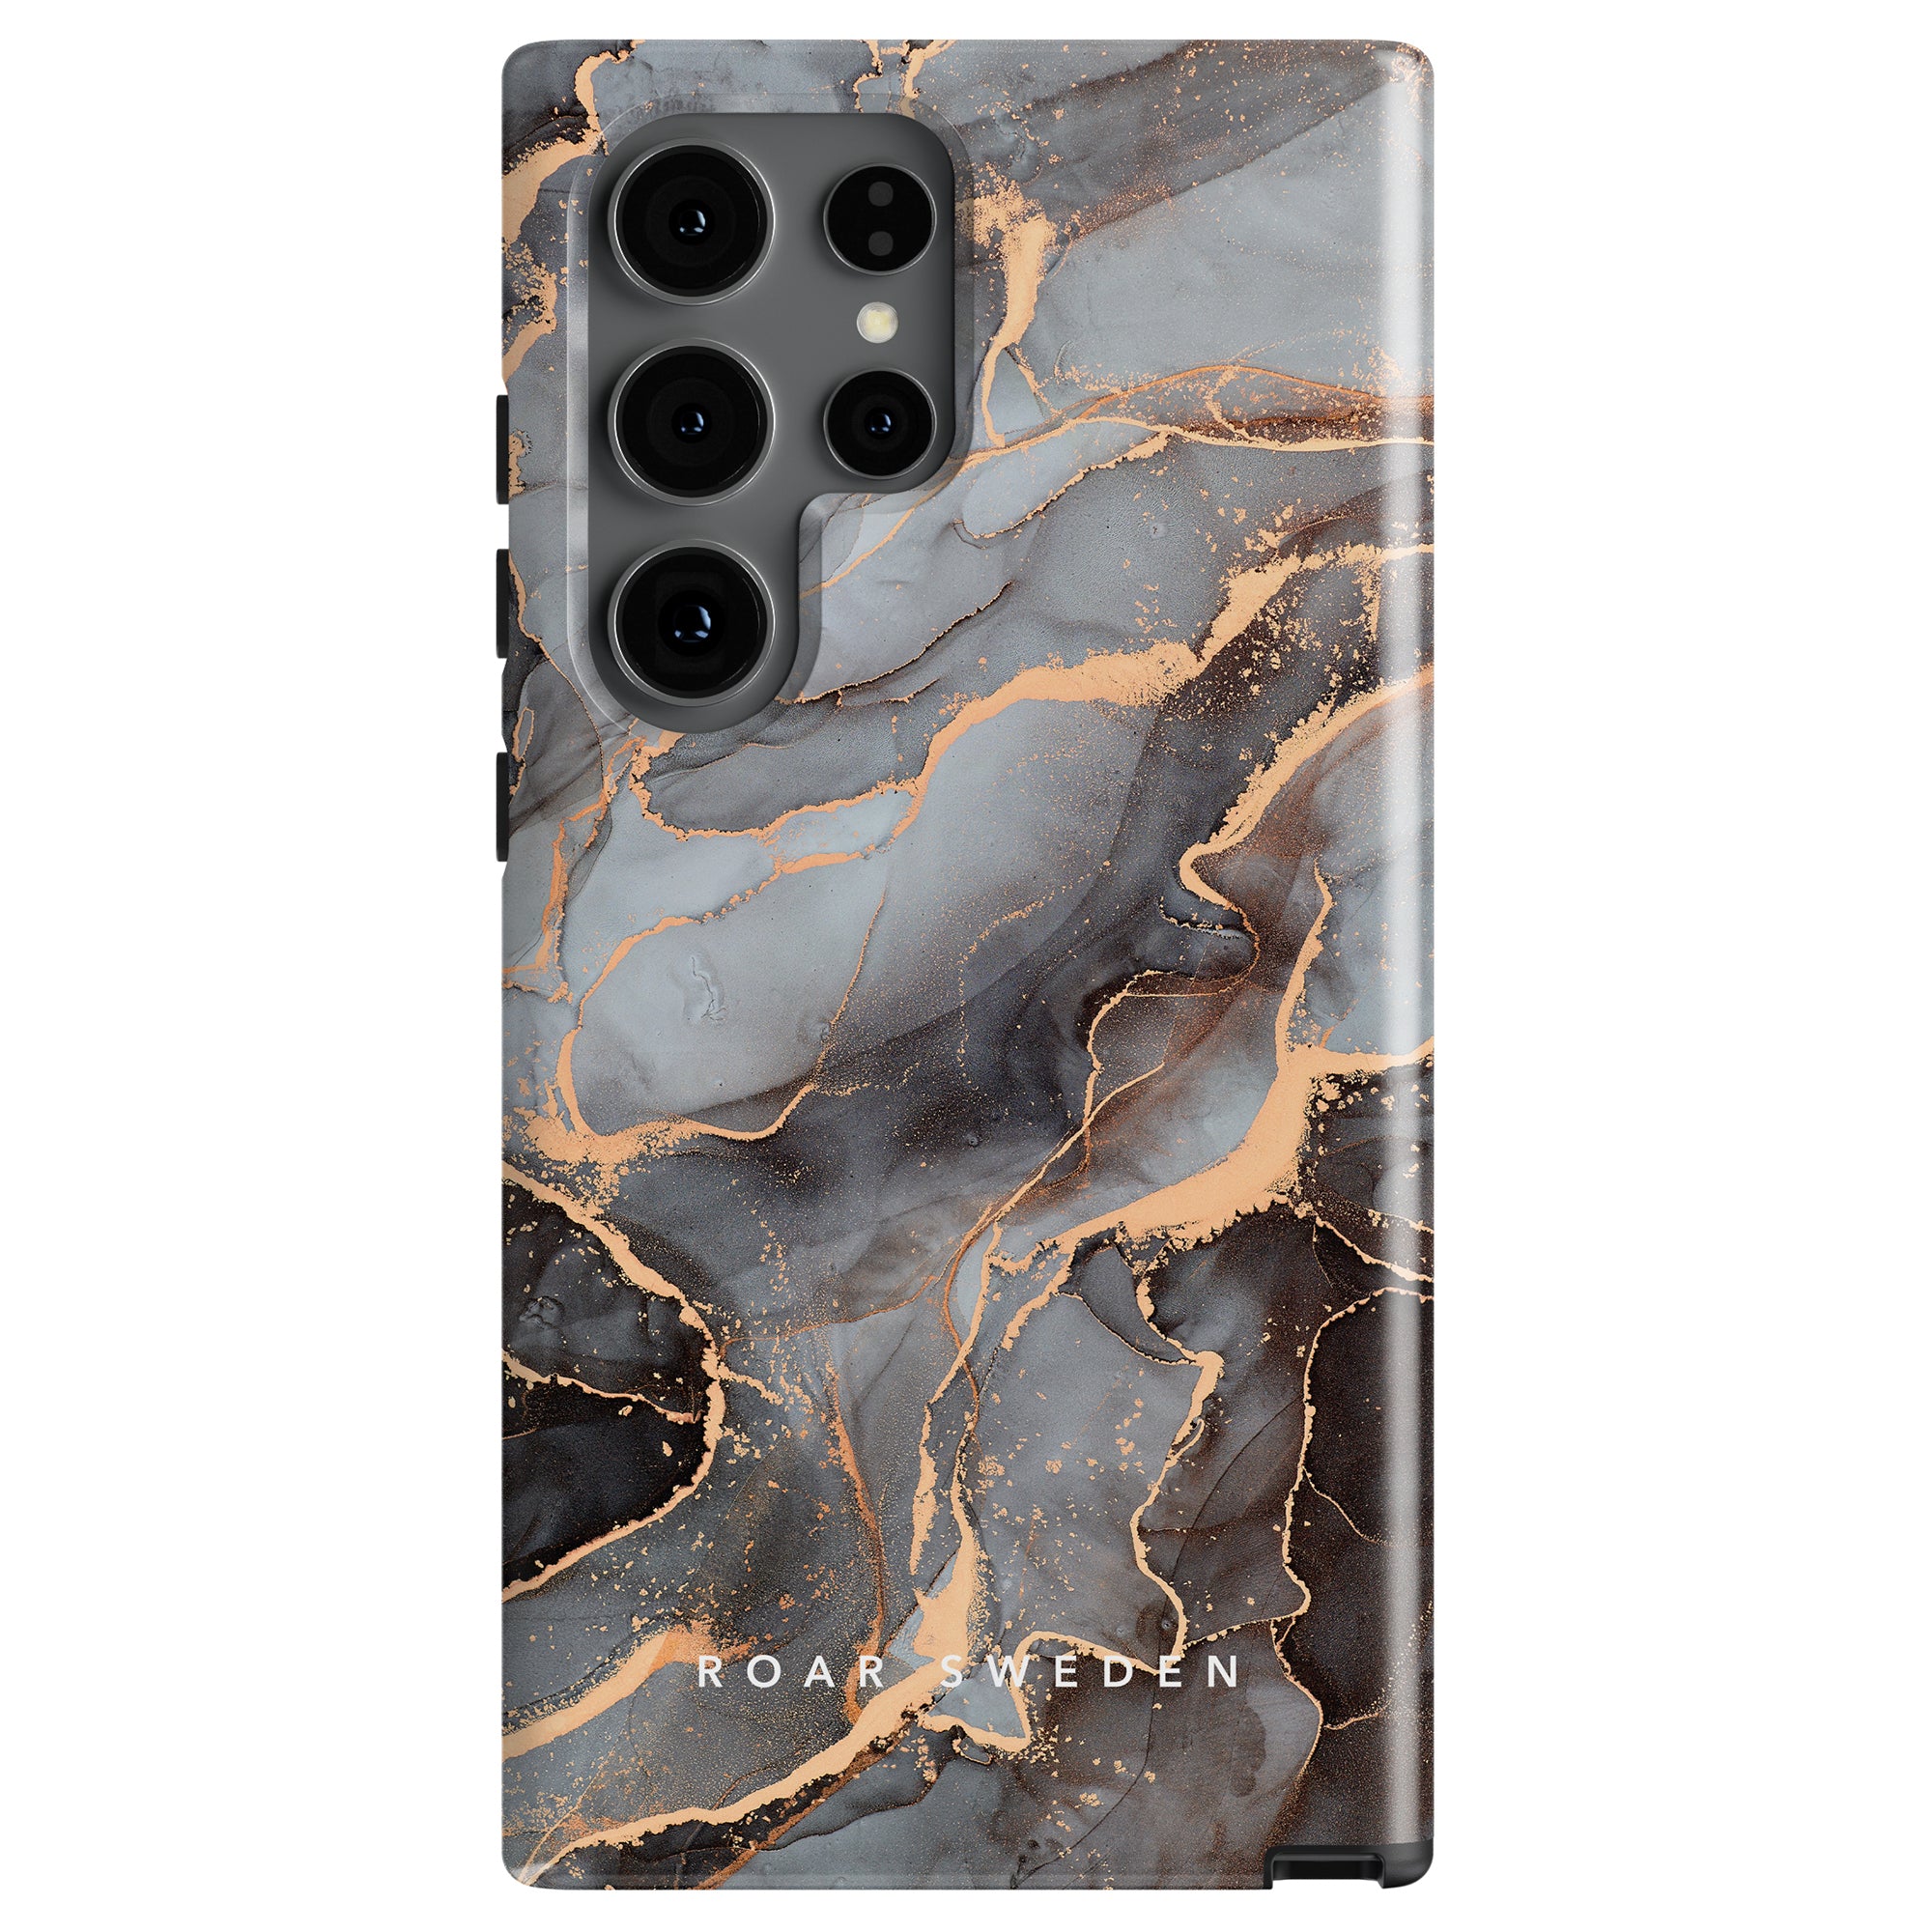 Rosy - Tough Case with a marbled design in shades of black, gray, and gold, featuring the brand name "Roar Sweden" at the bottom. This stylish case offers both elegance and essential skydd for your phone.